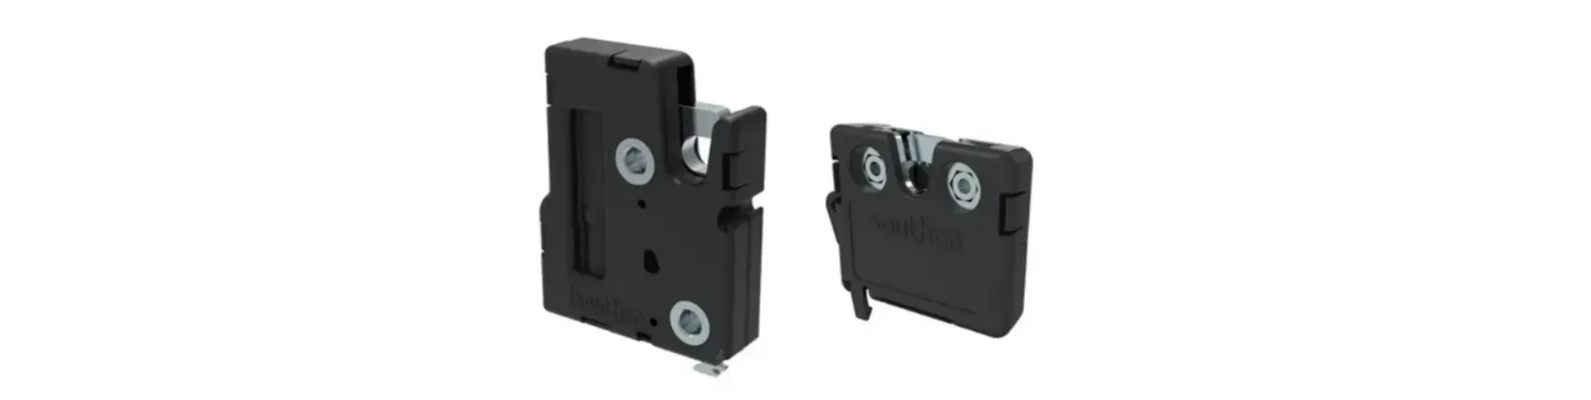 R4-EM Electronic Rotary Latches